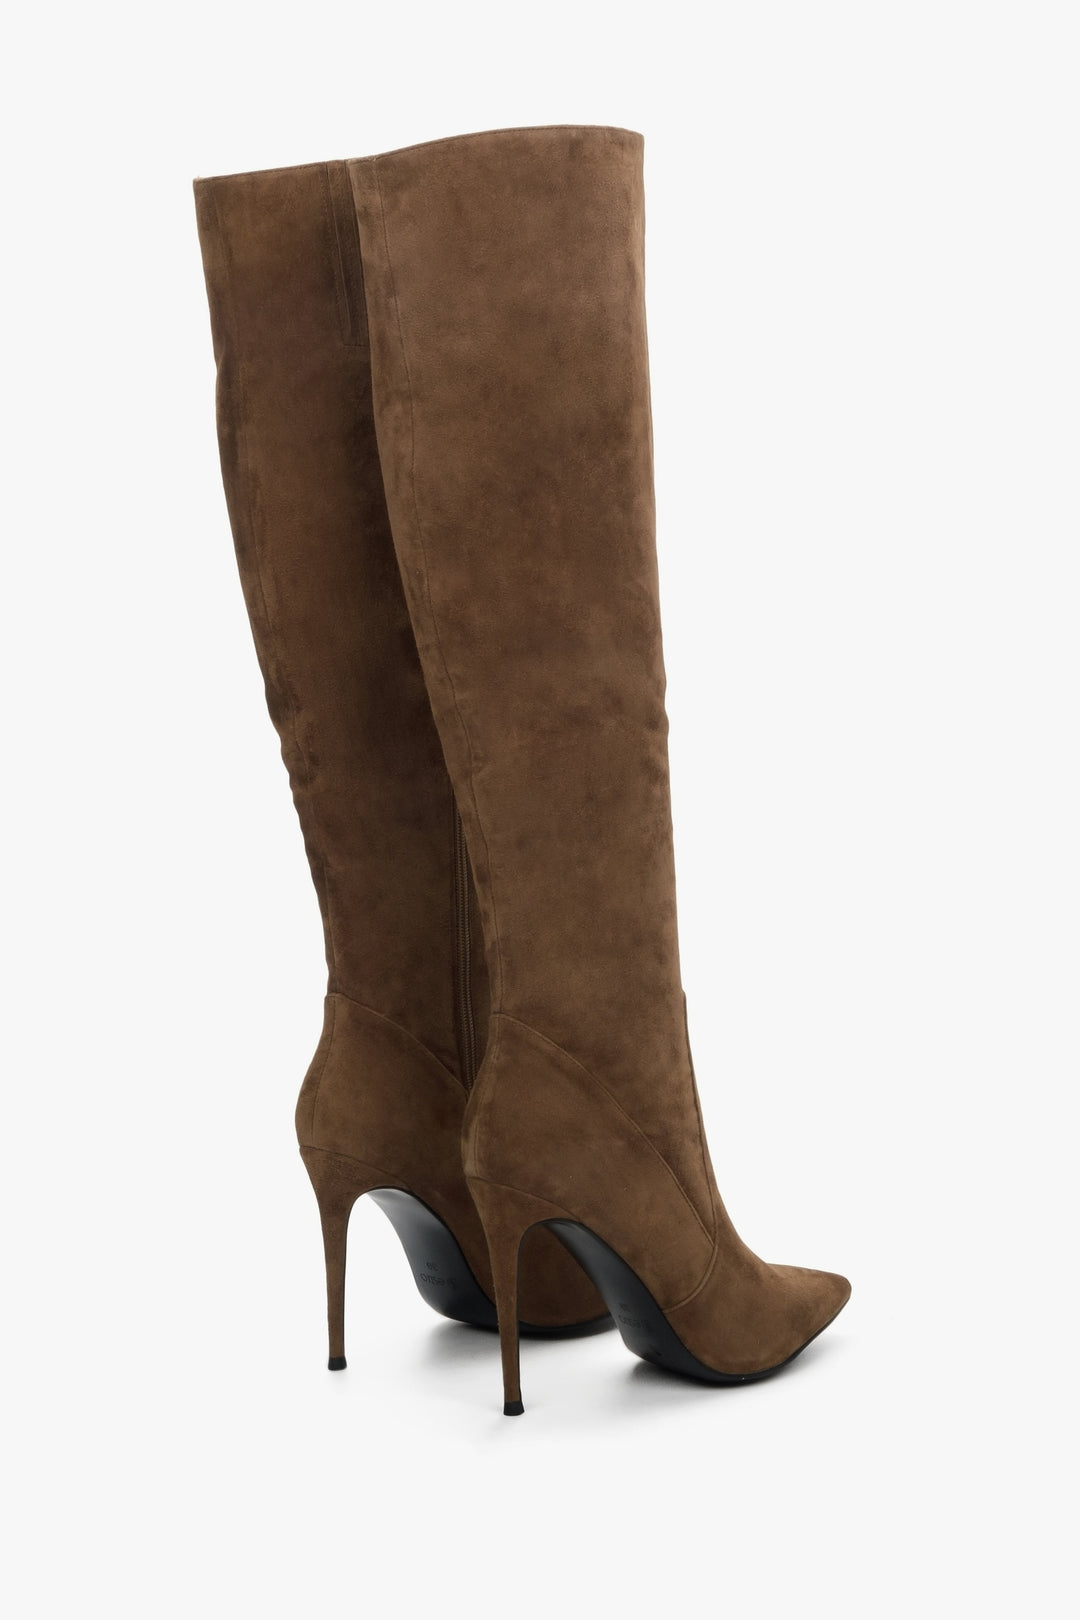 Women's brown velour stretchy boots.